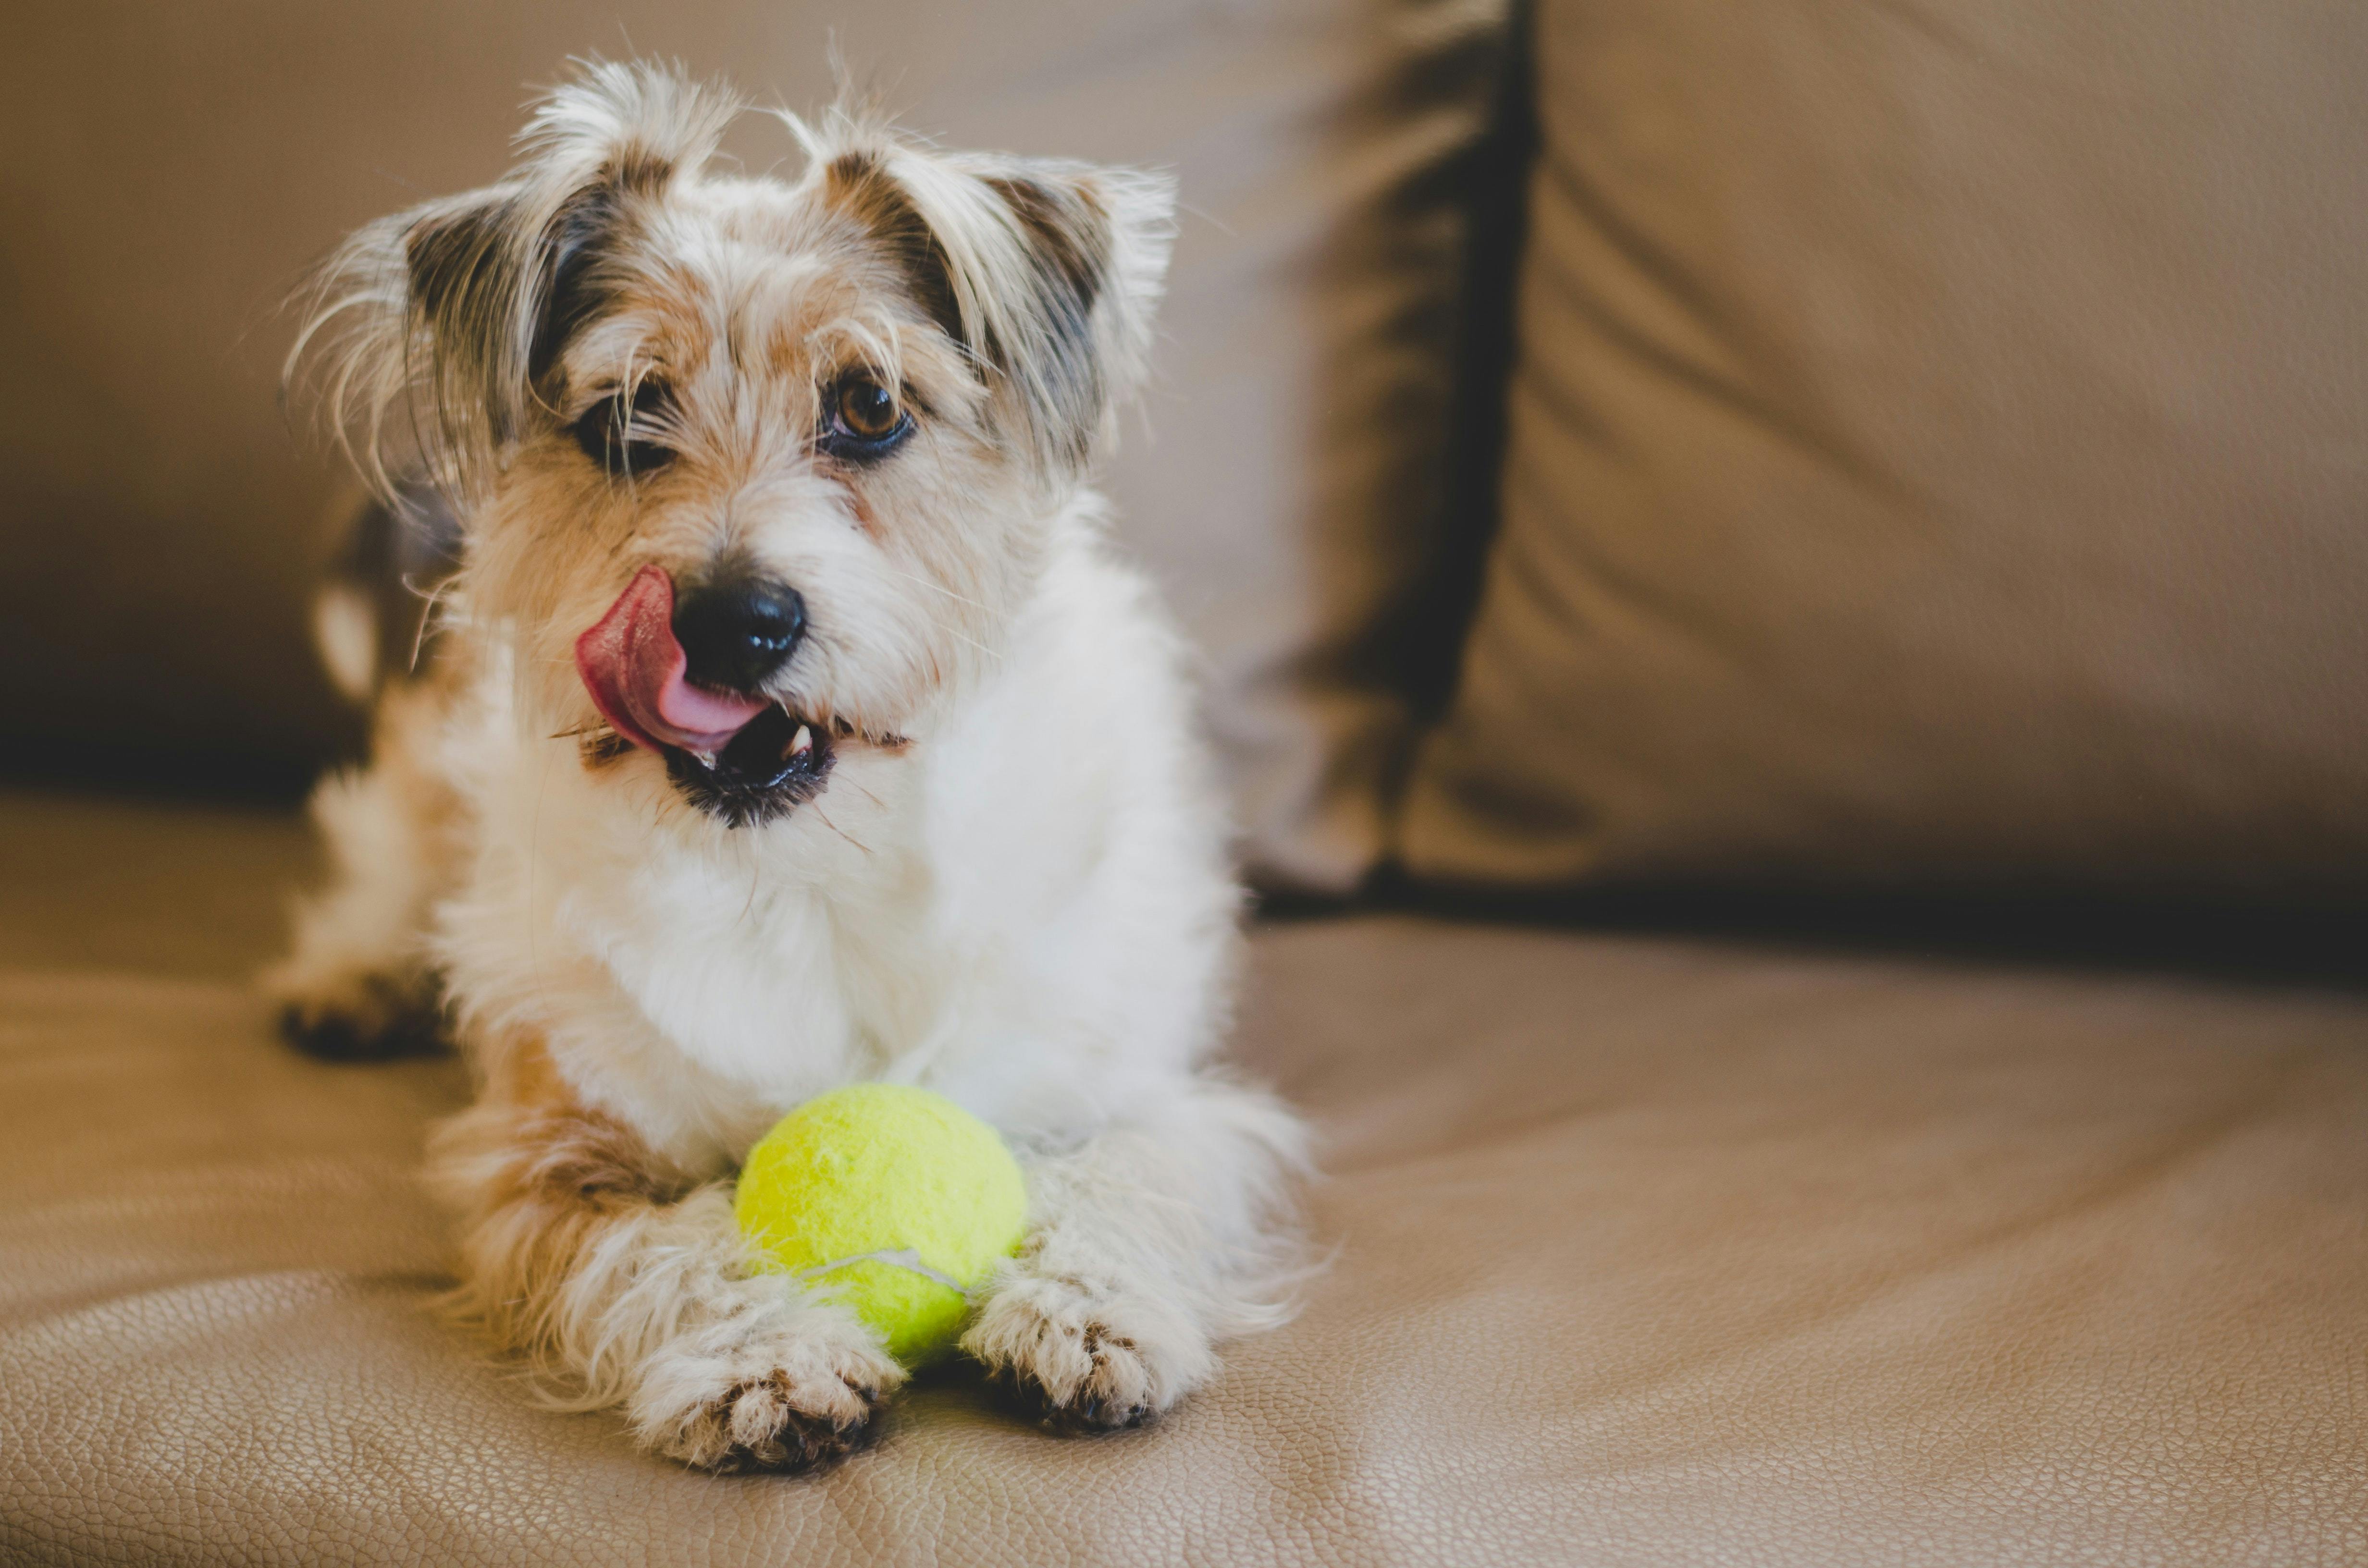 Scruffy dog licks lips on couch with tennis ball between paws